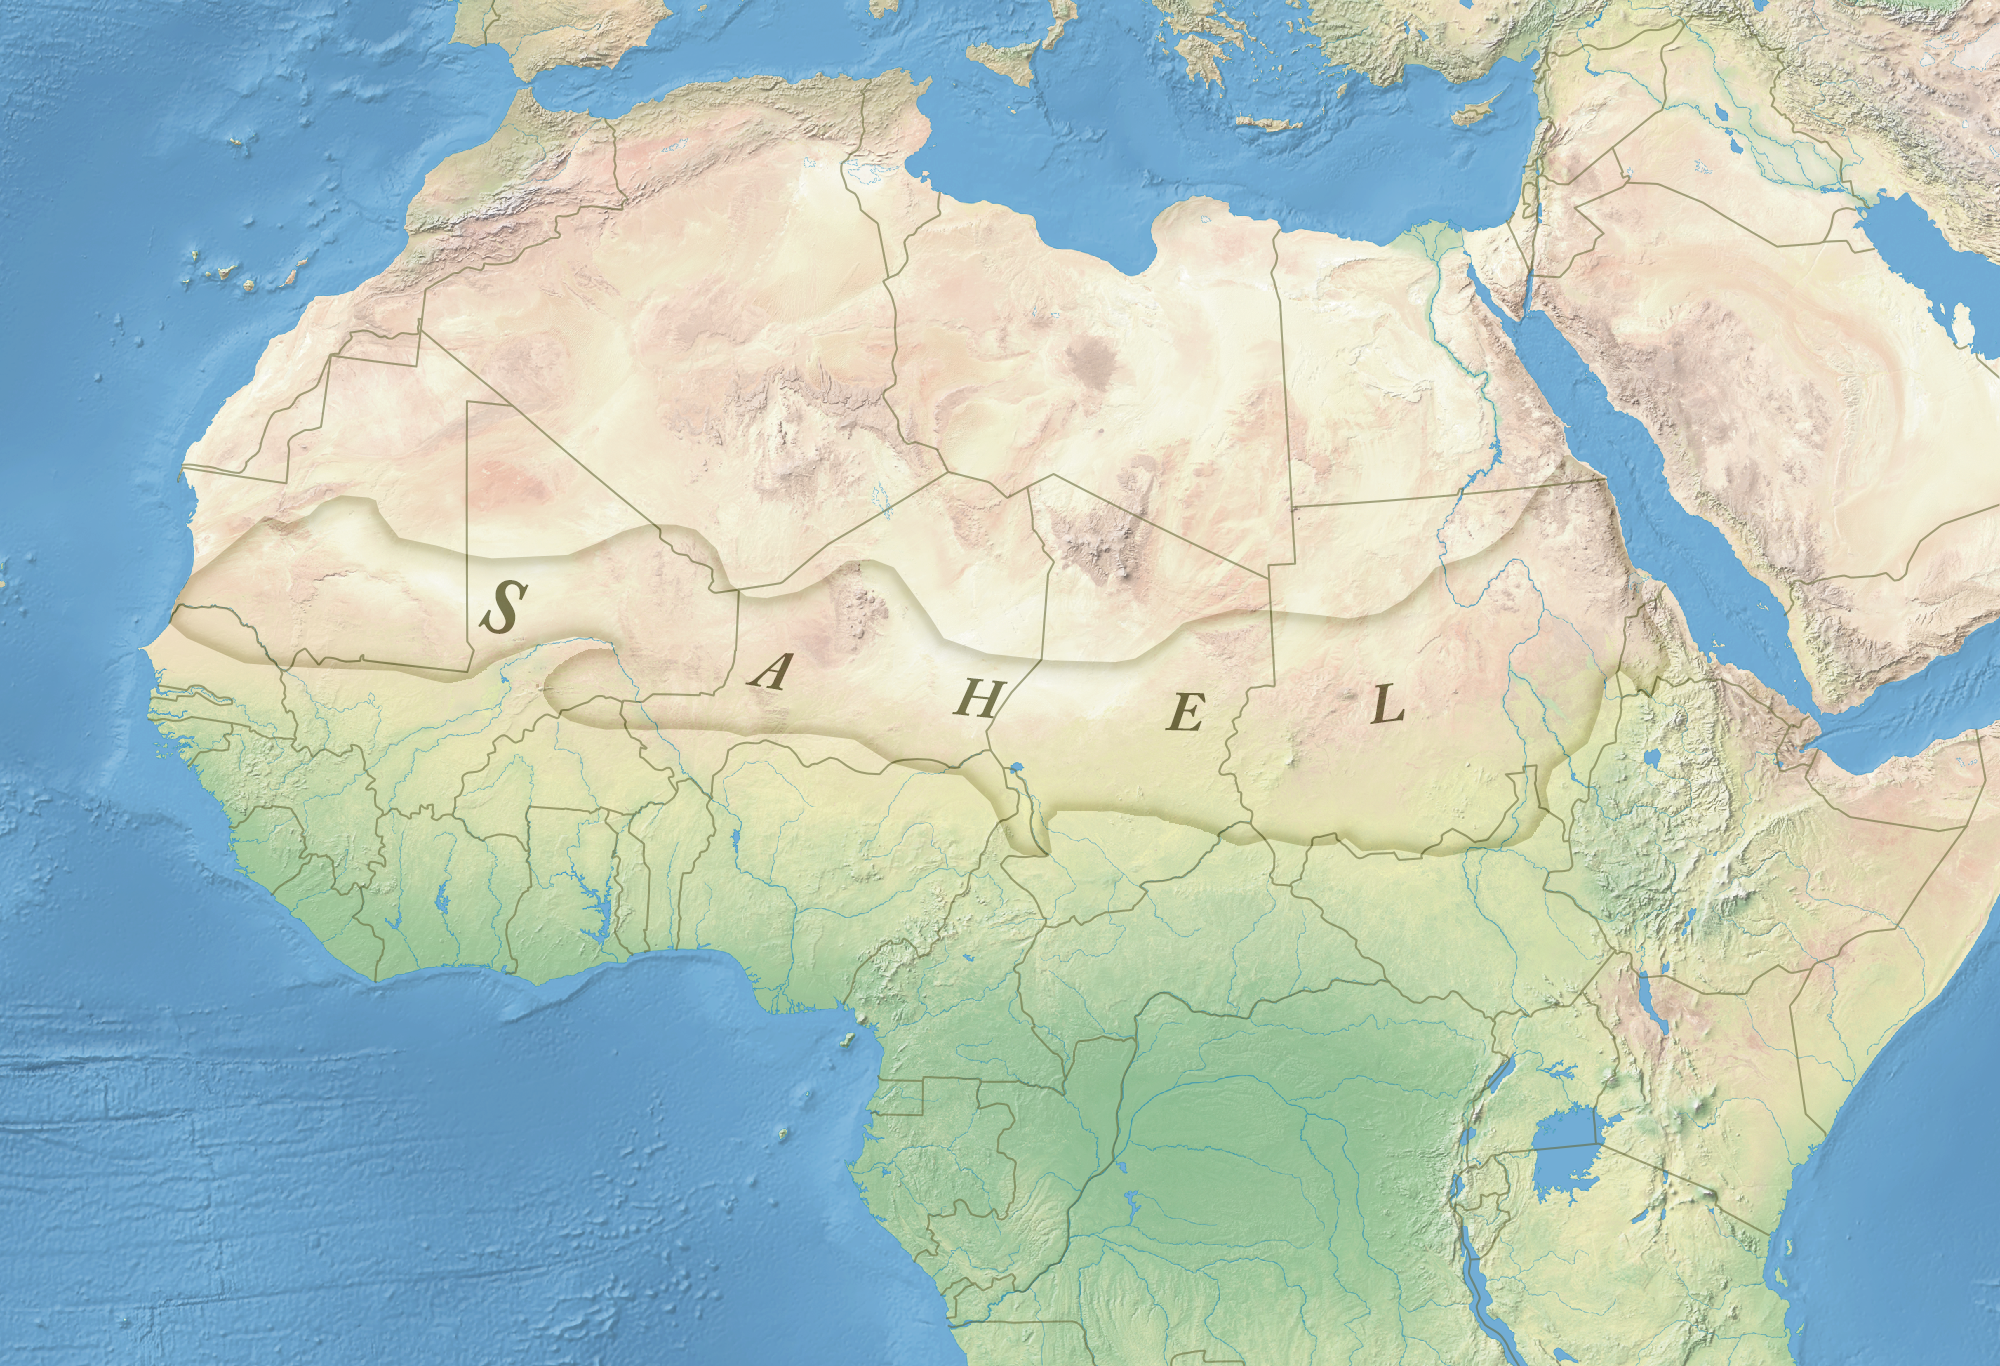 Chad’s Role Fighting Terrorism in the Sahel